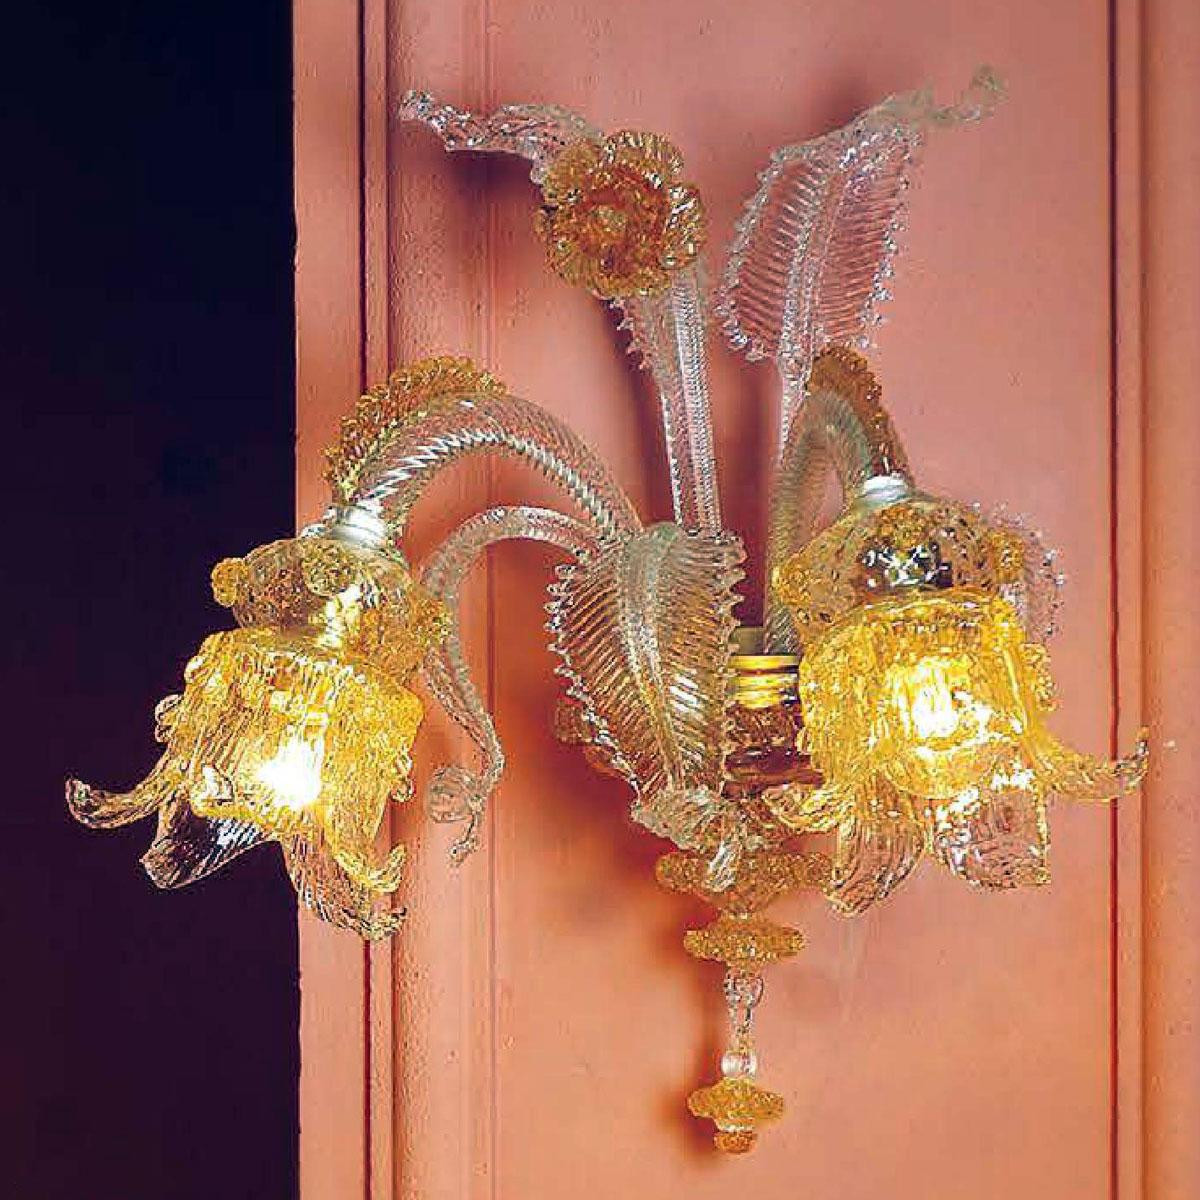 "Ellesse" Murano glass sconce - 2 lights - transparent and amber